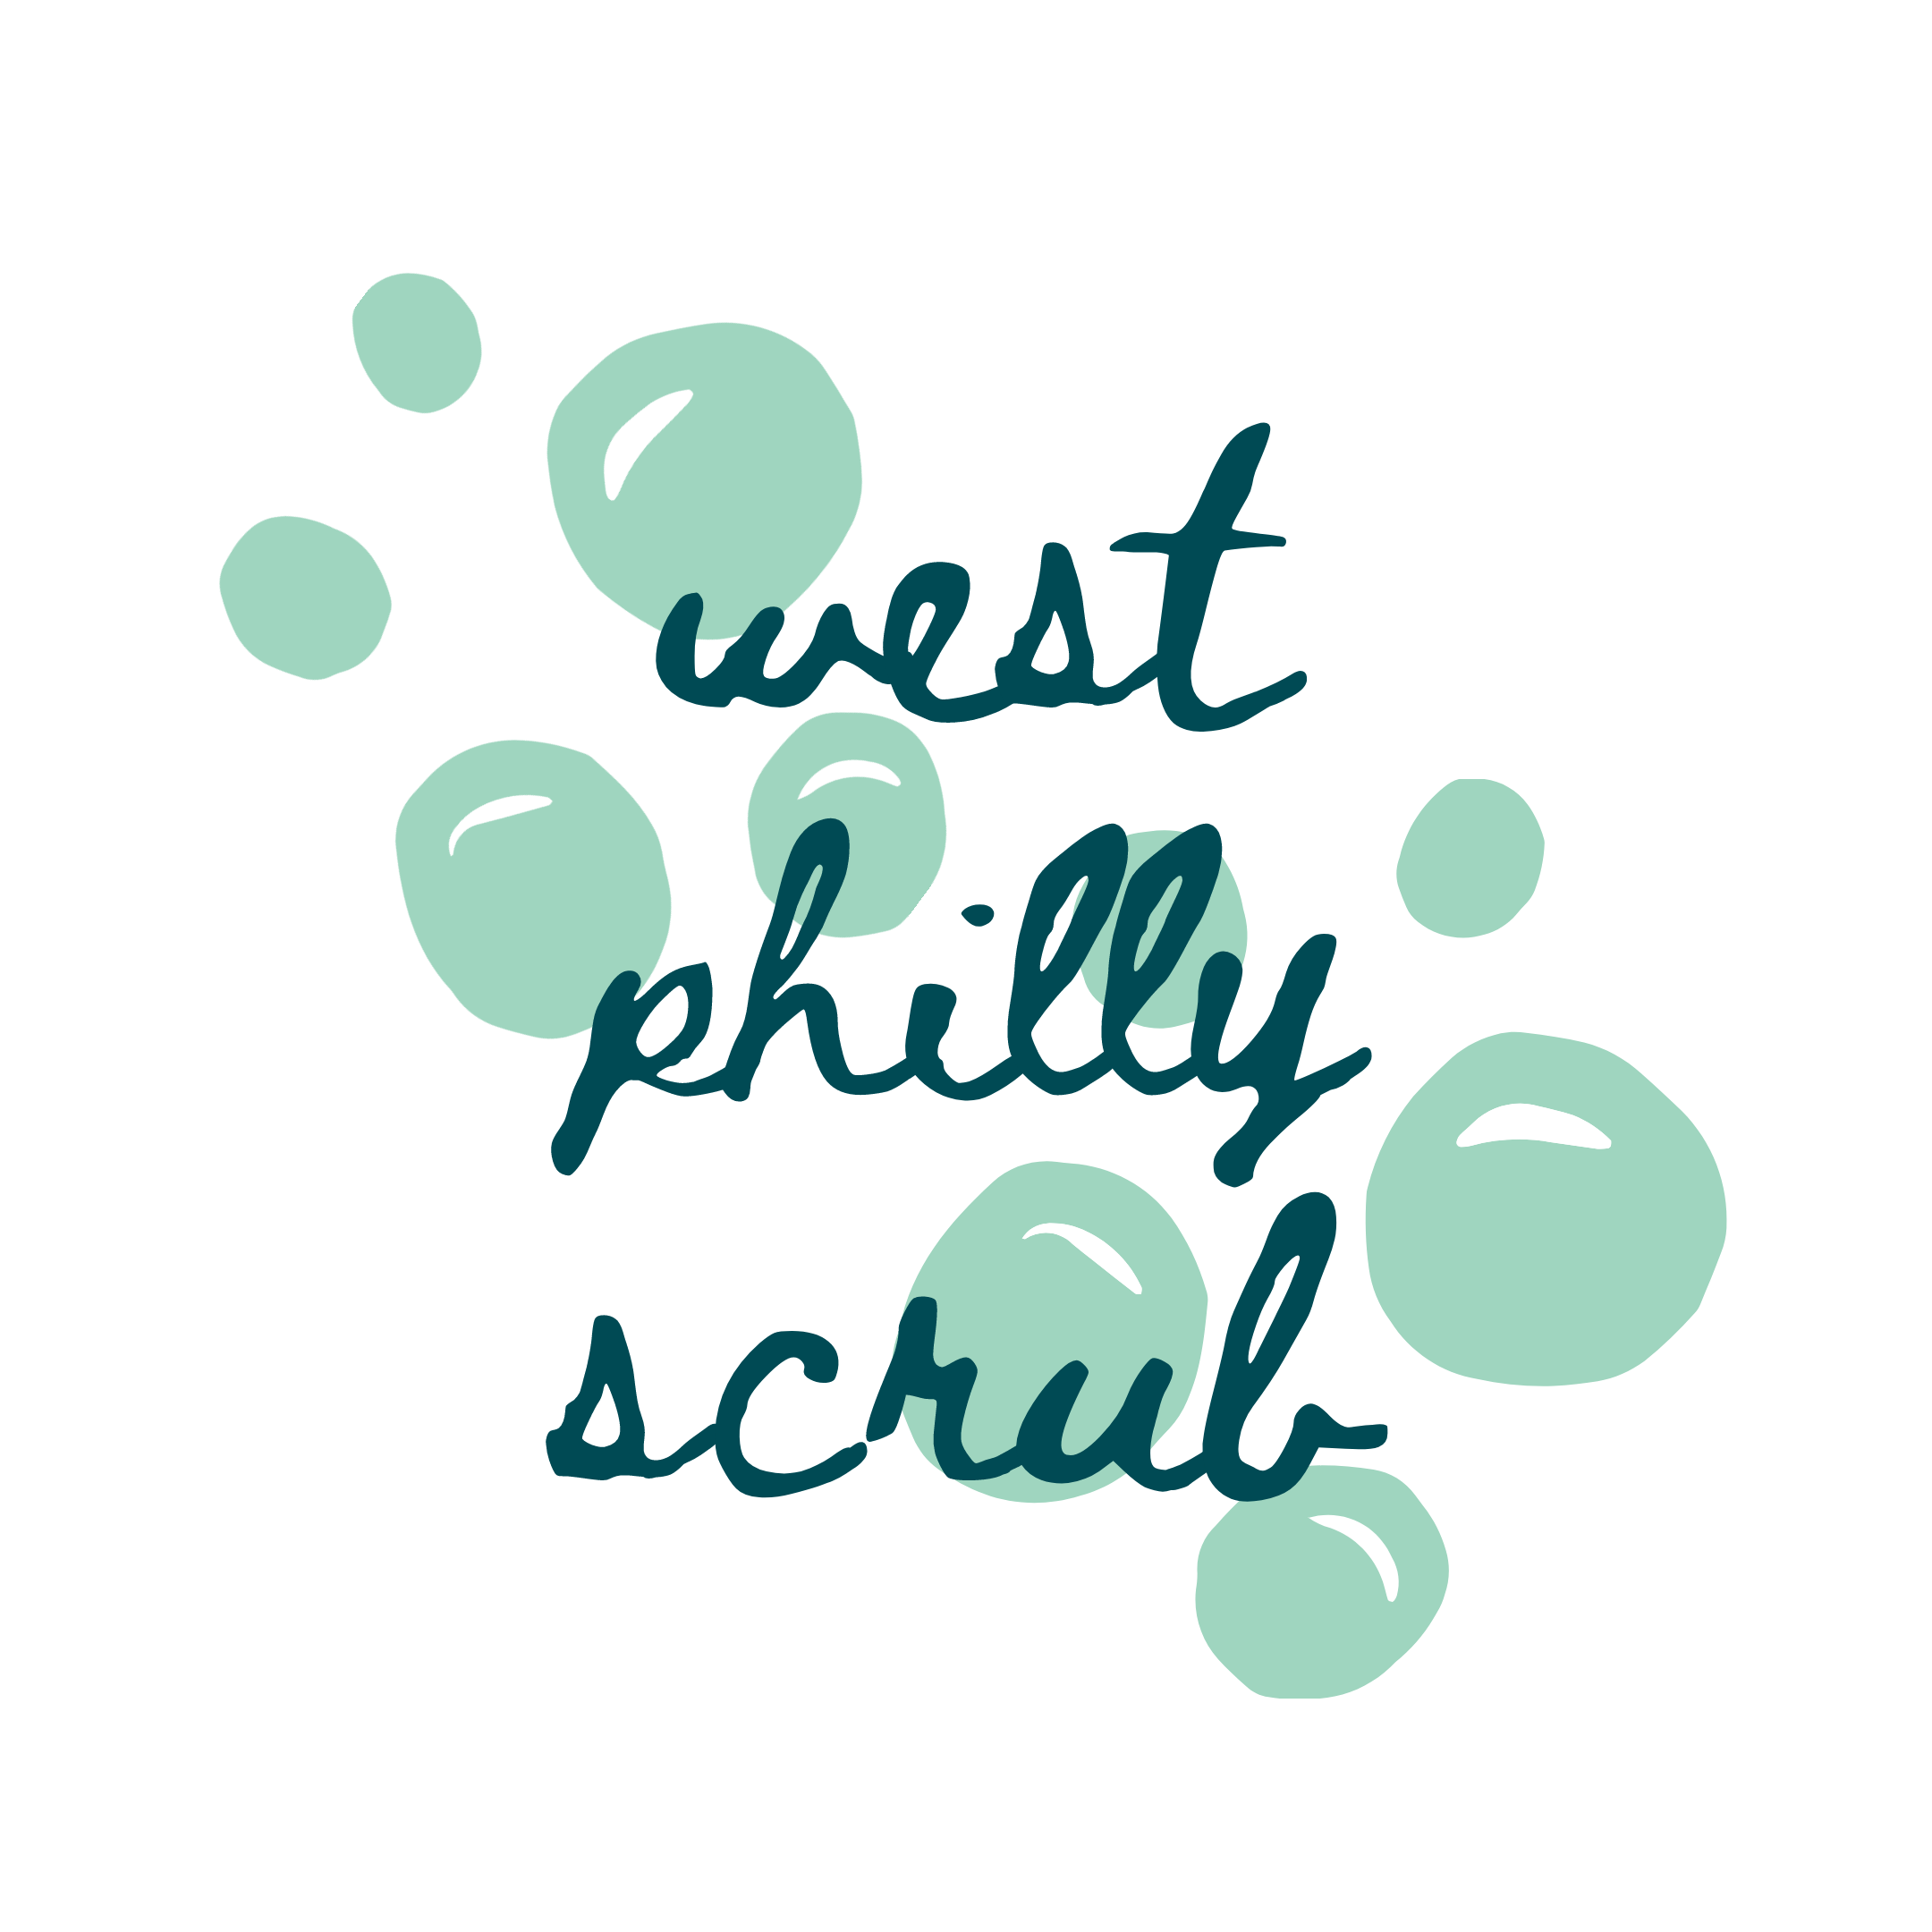 The West Philly Scrub